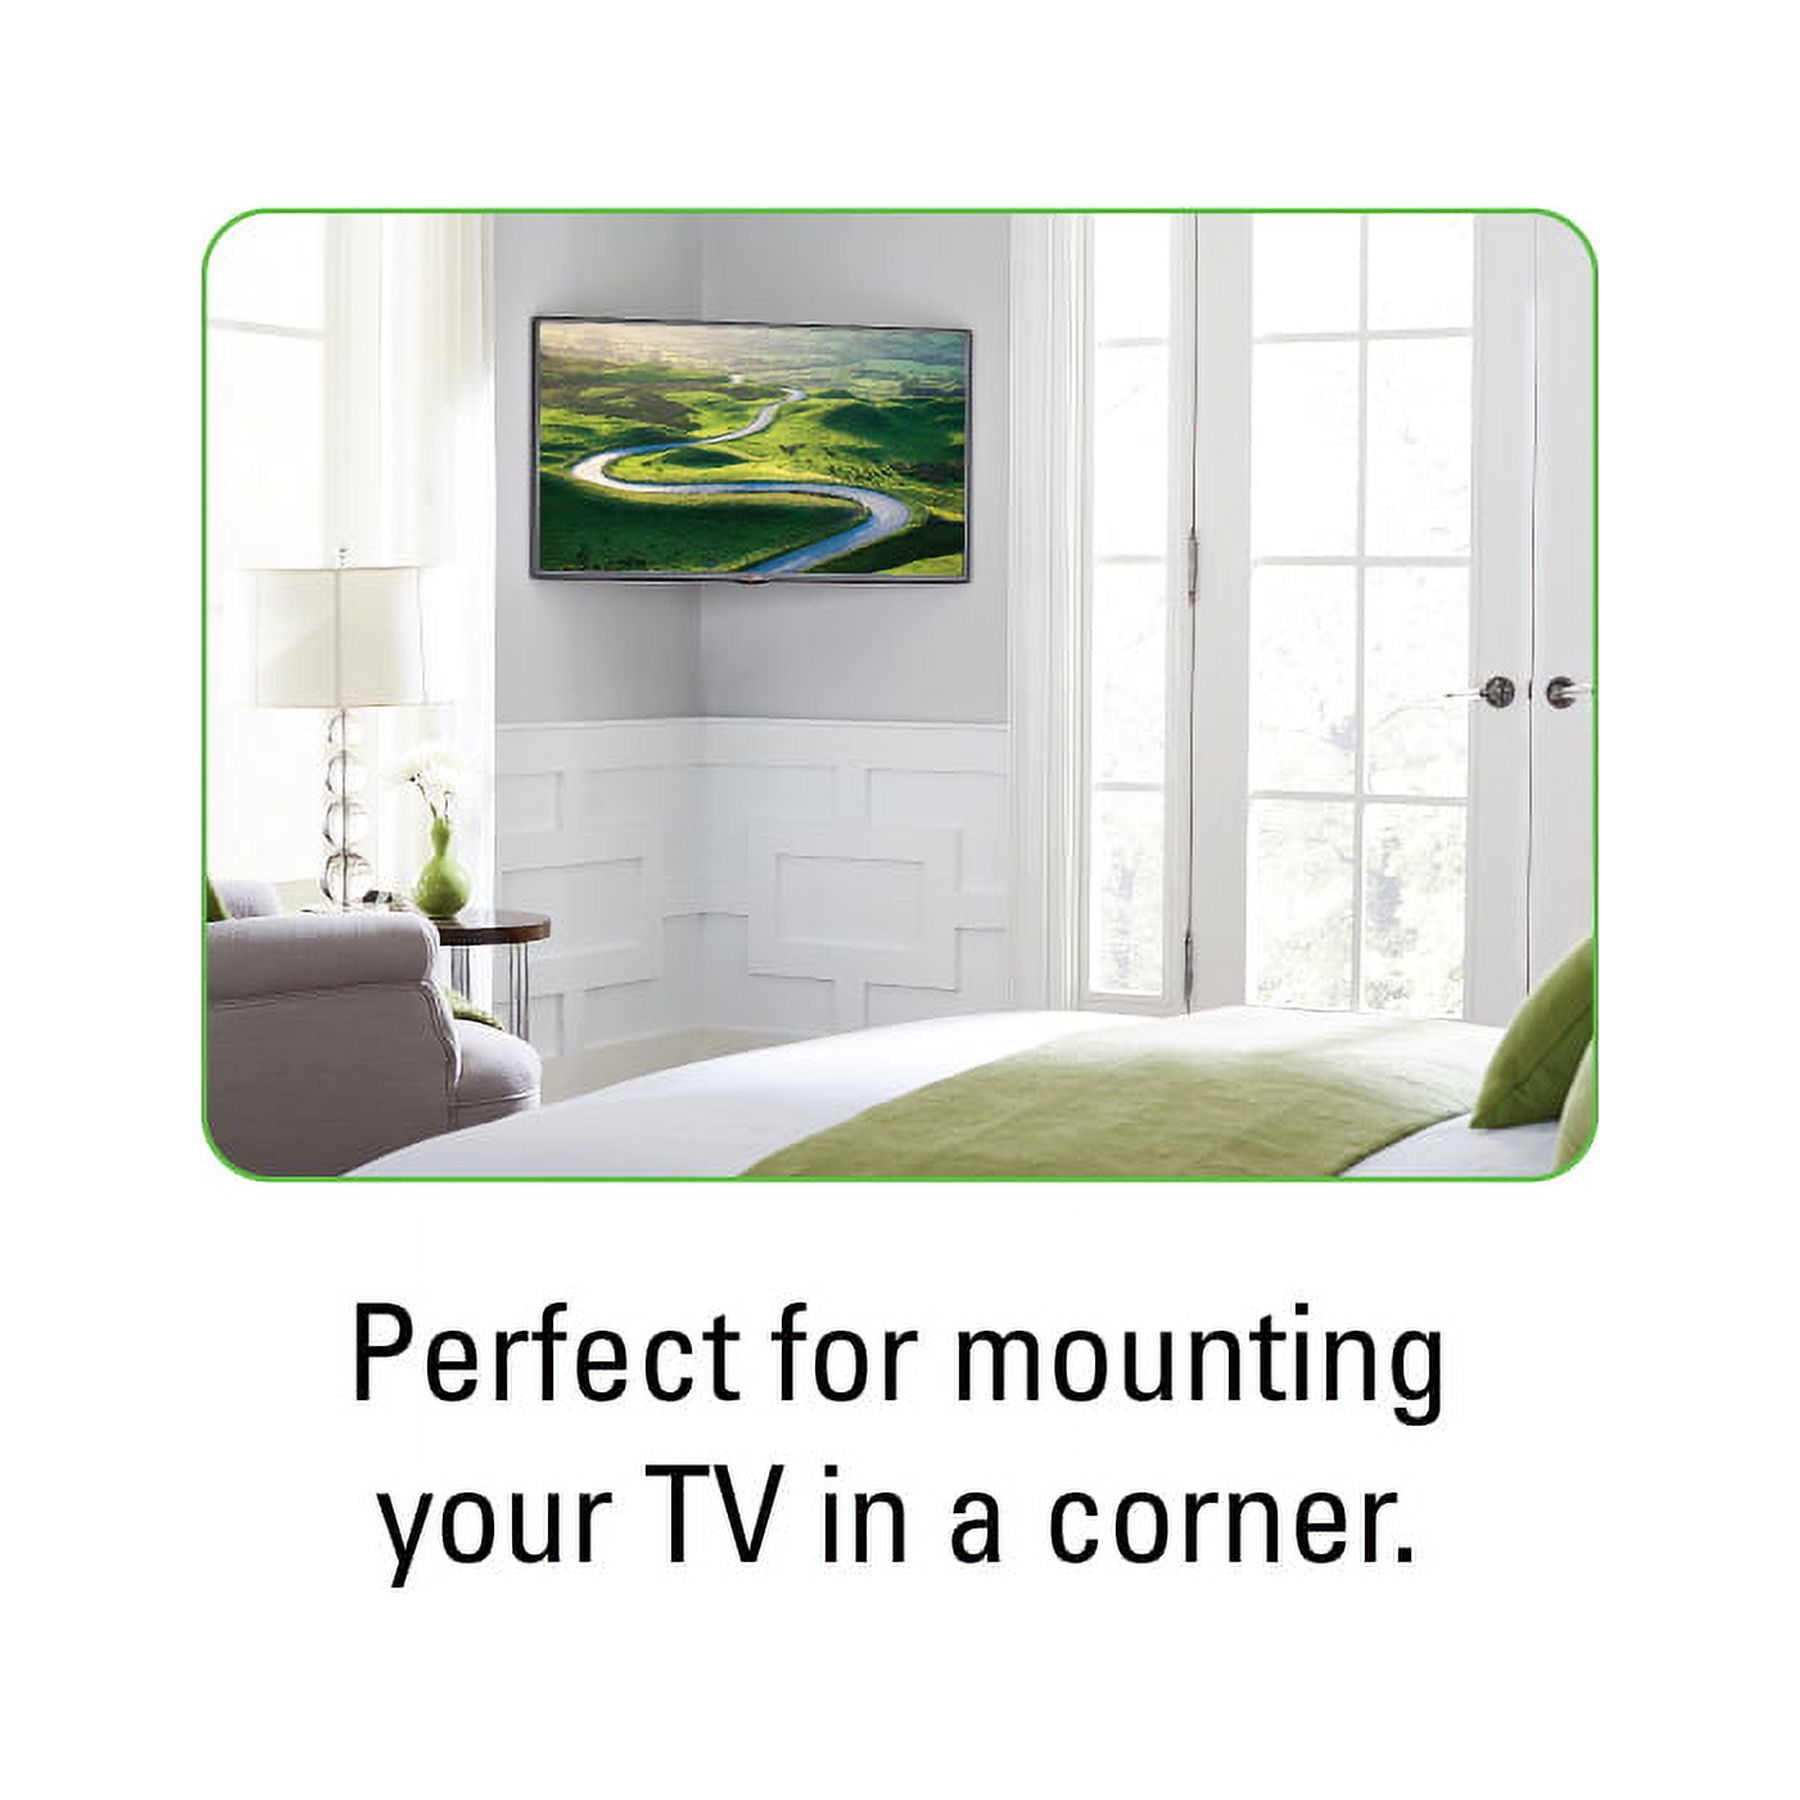 SANUS Full-Motion TV Mount for 32"-55" w/ cable tunnels & 10' HDMI - image 3 of 7